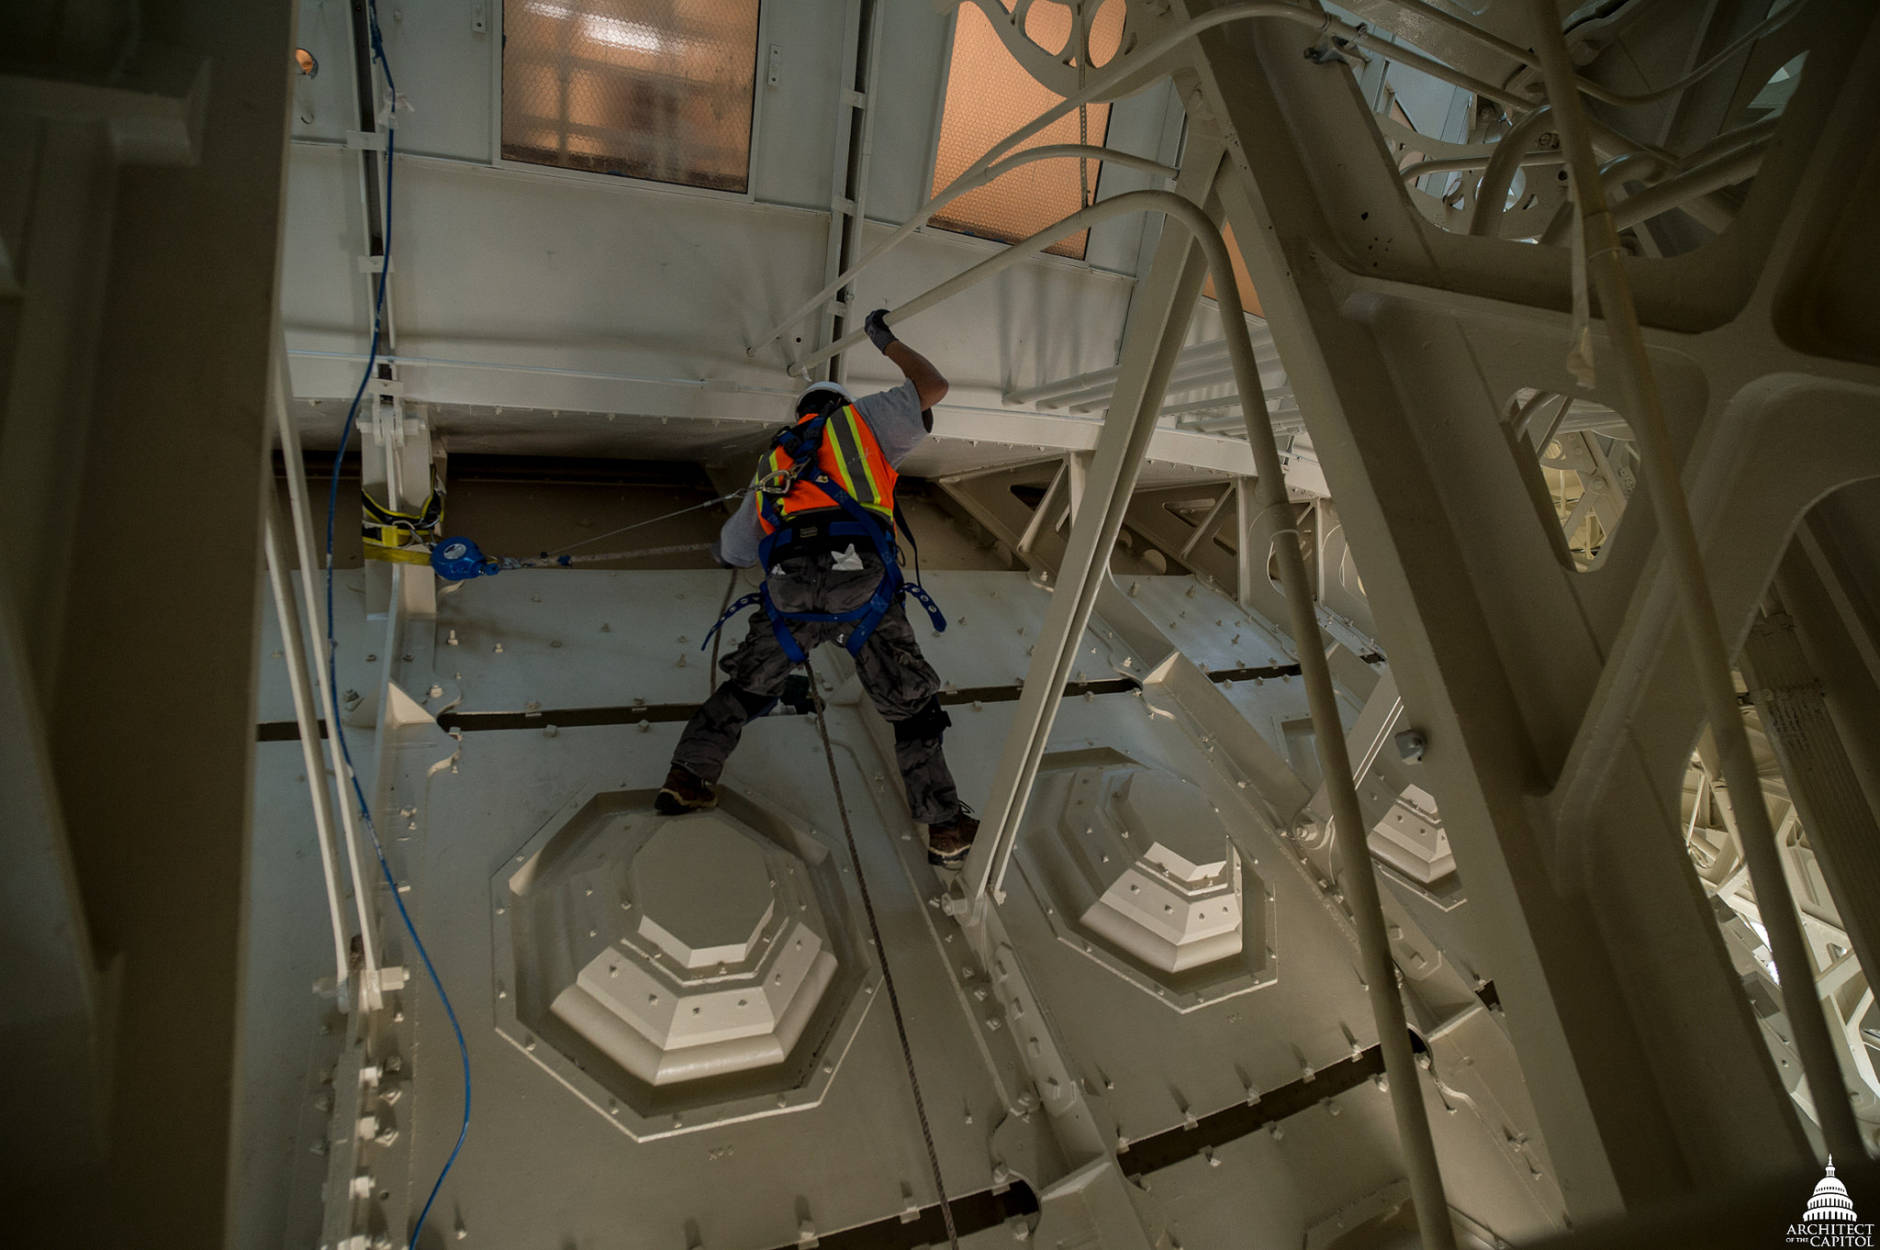 The Architect of the Capitol is in the final painting phase of the Dome Restoration Project. Other restoration work also continues. (Architect of the Capitol)